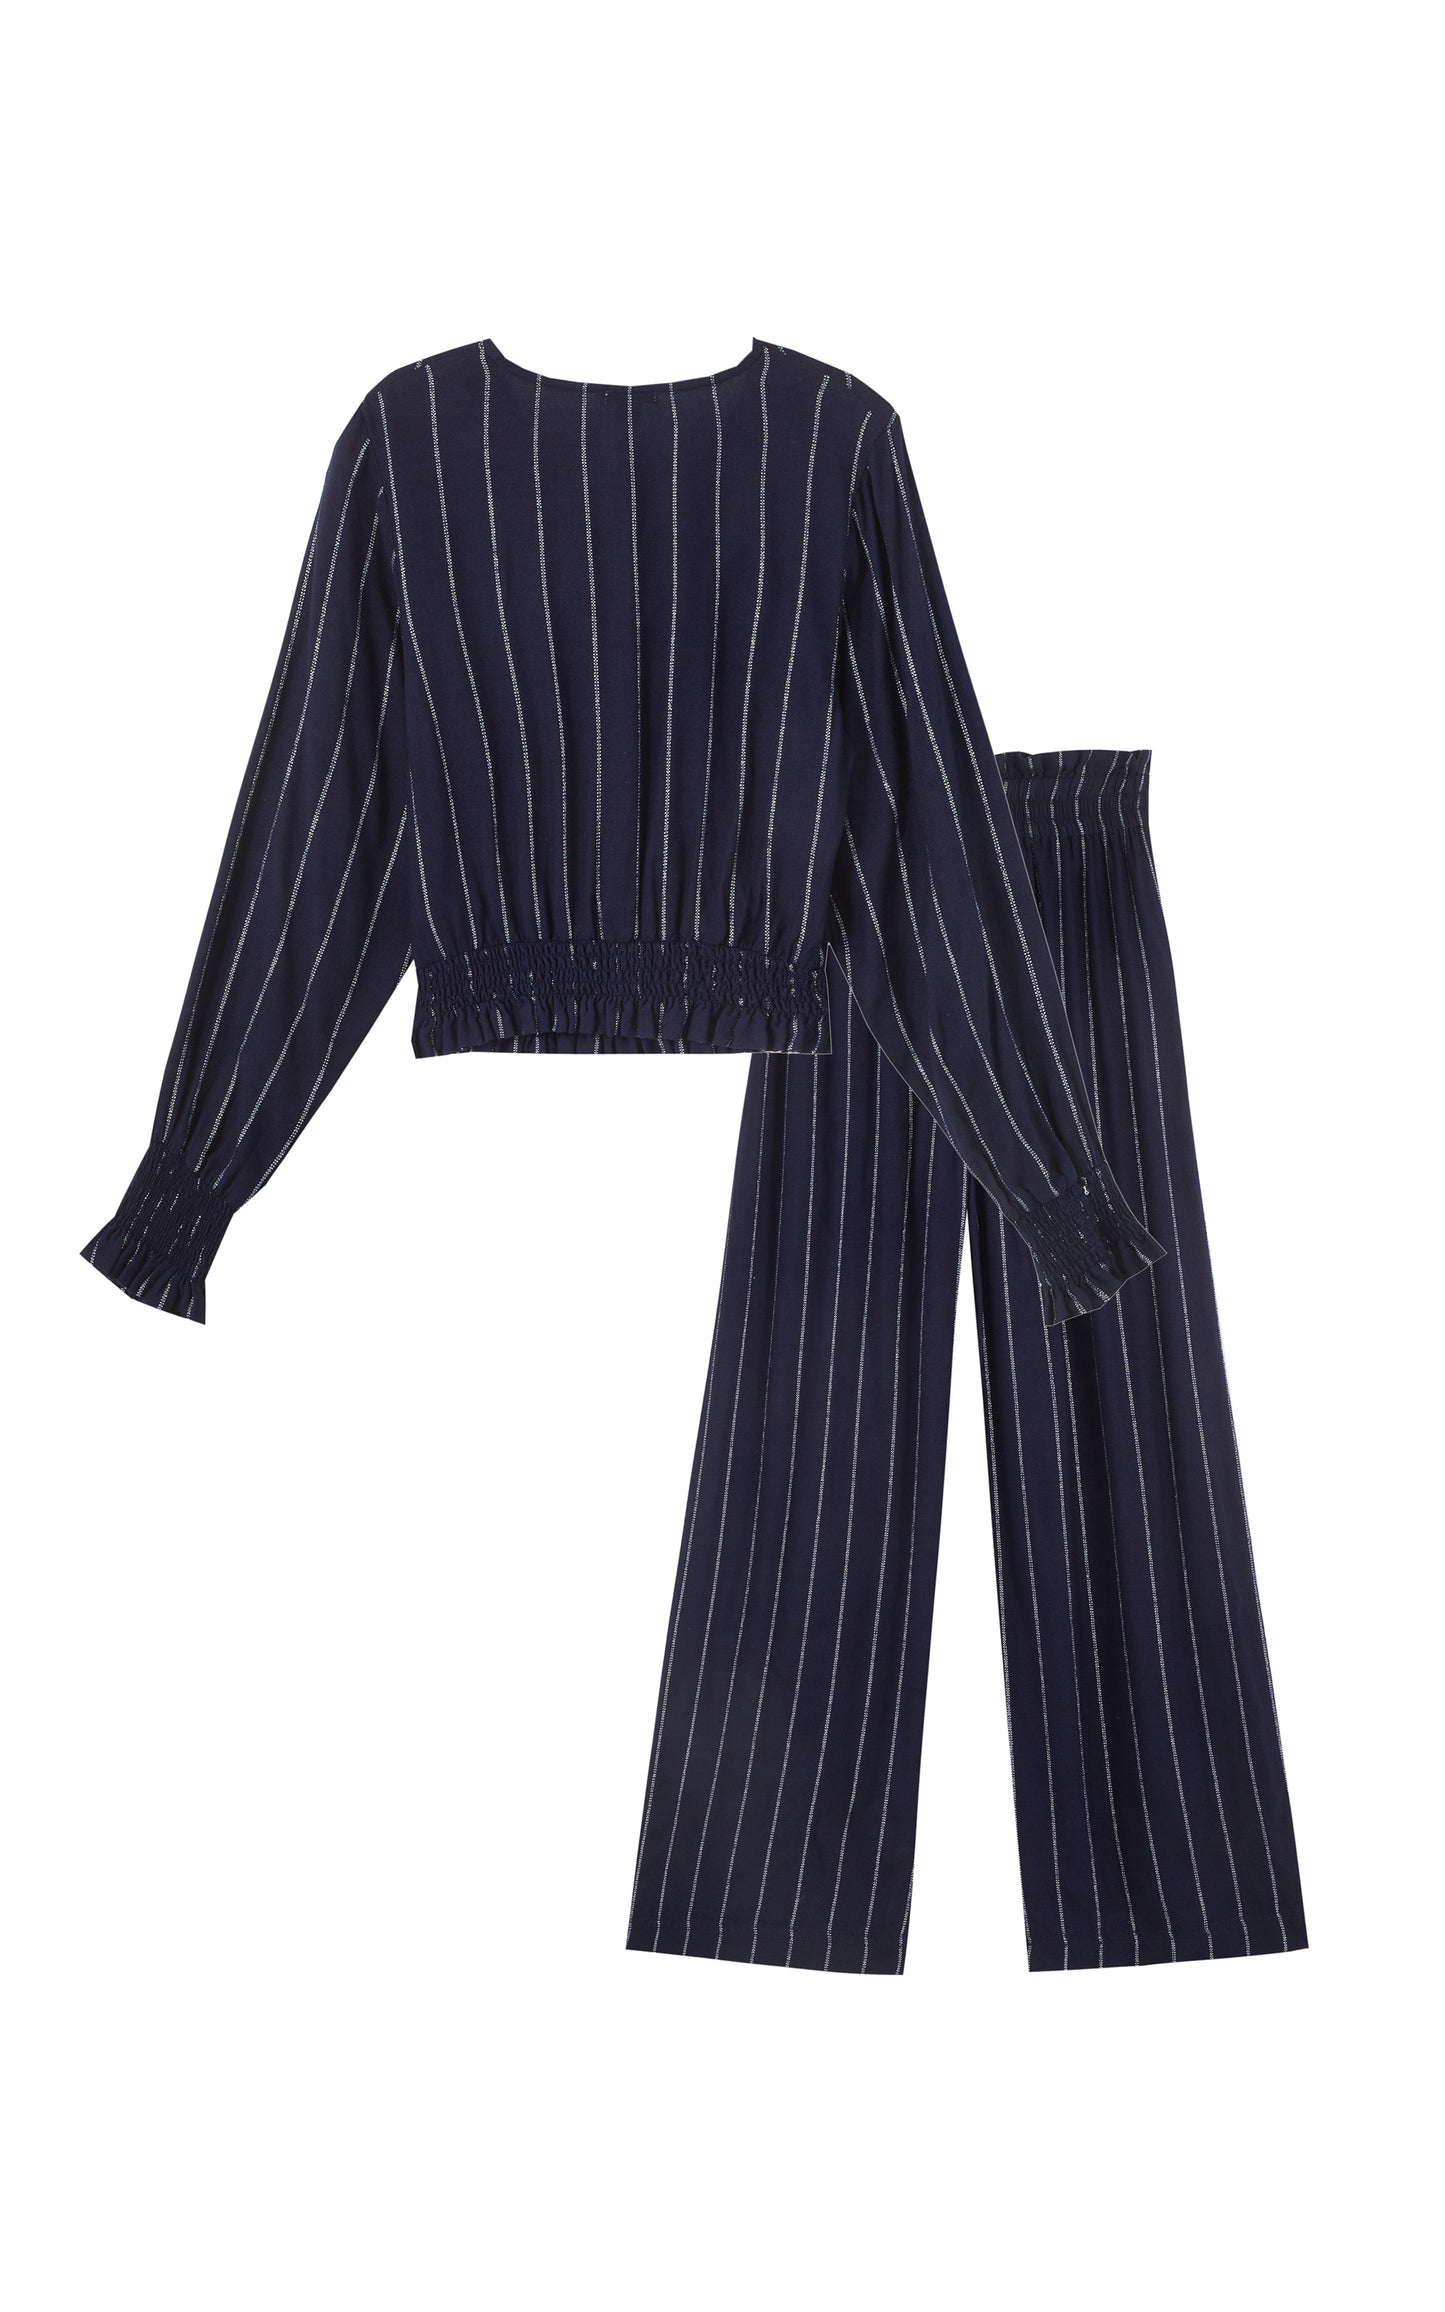 BACK OF DARK BLUE WITH PALE GREY STRIPES LONG SLEEVE TOP AND MATCHING BAGGY WIDE LEG PANTS WITH SMOCKED WAIST